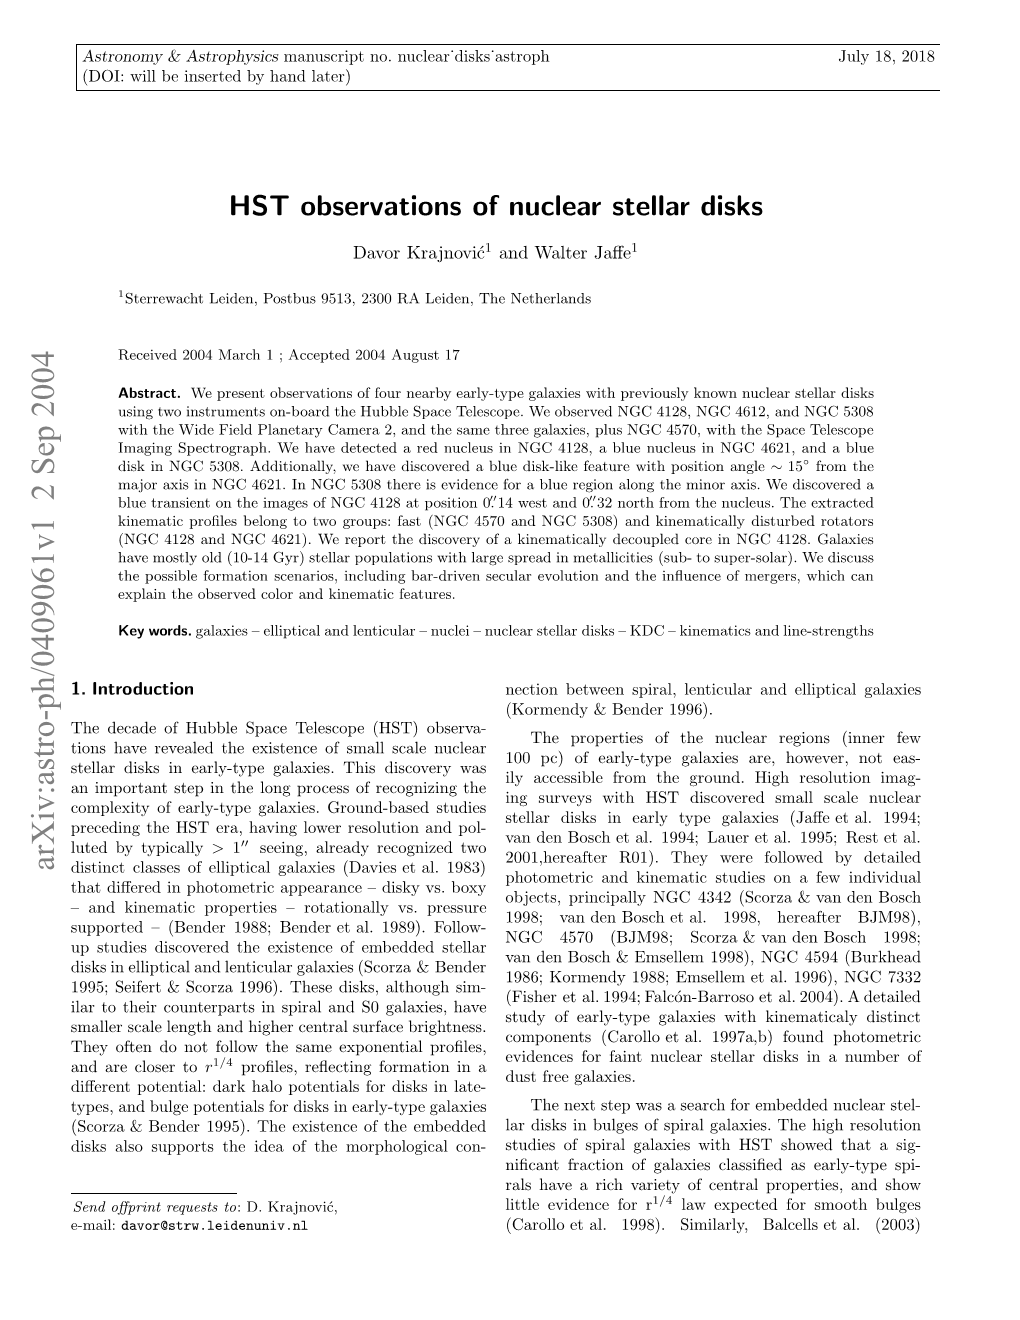 HST Observations of Nuclear Stellar Disks Found Moderately Large Fraction (34%) of Nuclear Bars Or Table 1